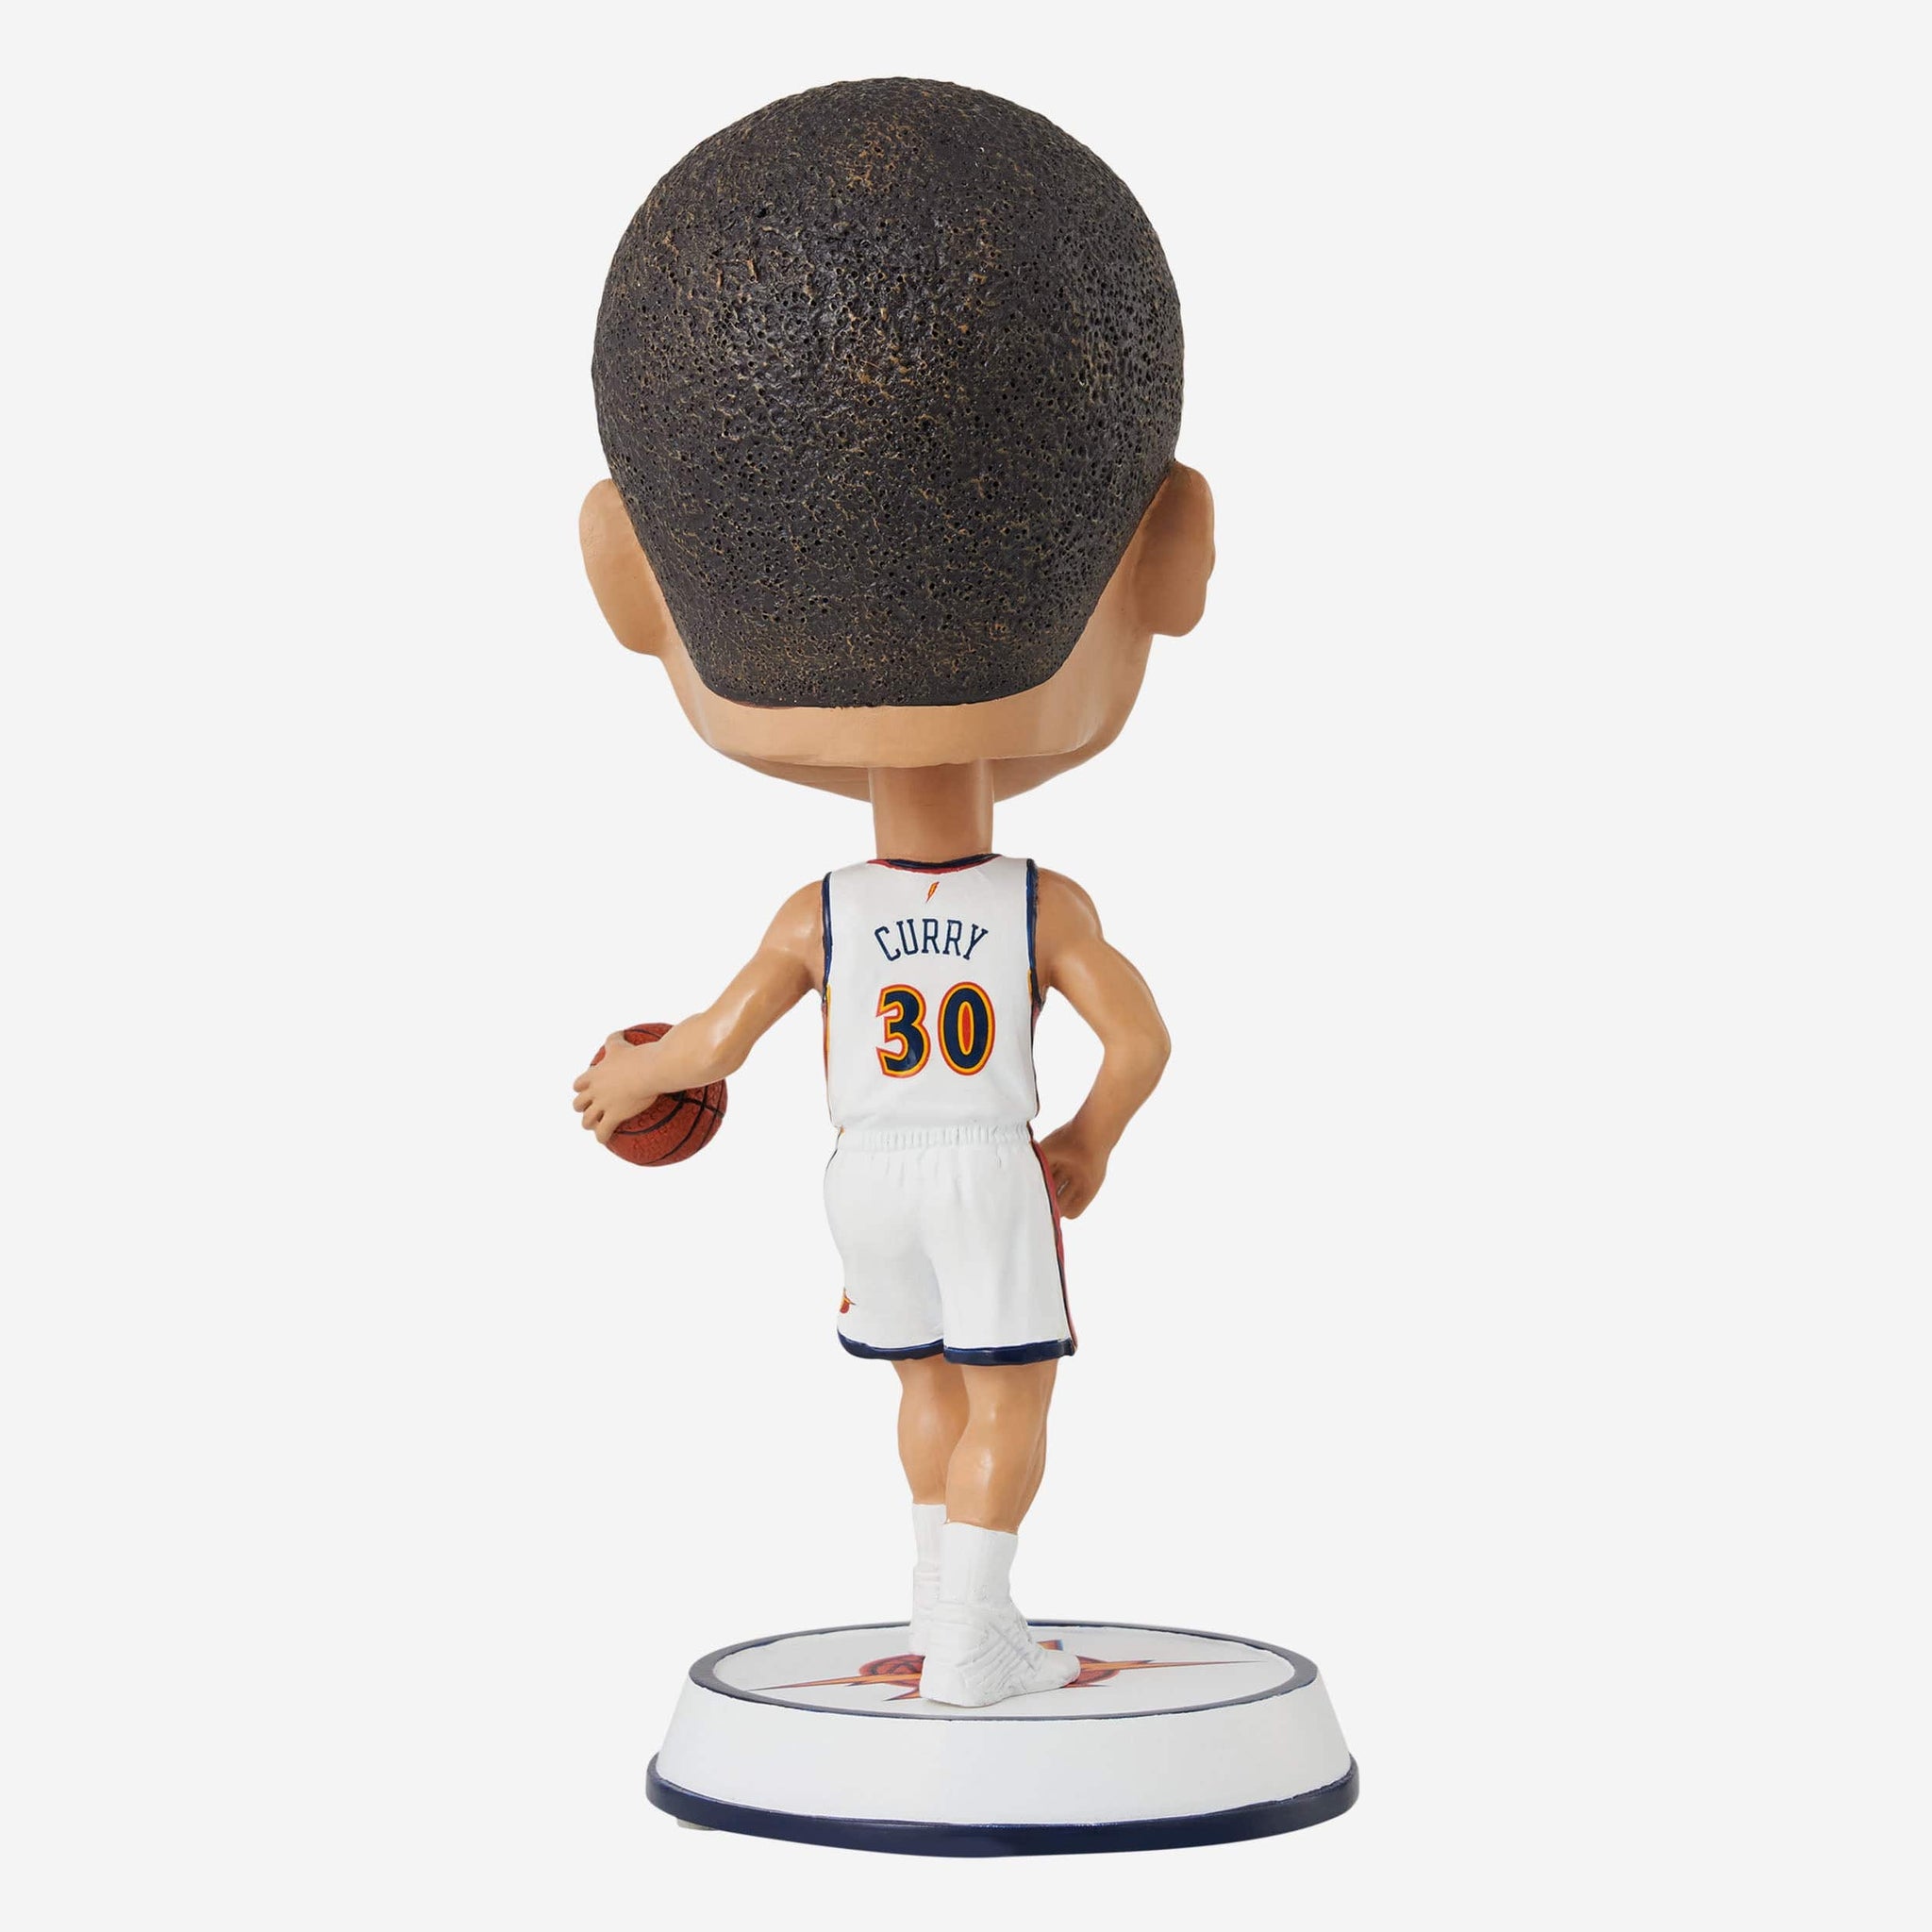 Steph Curry Golden State Warriors NBA Japan Games 2022 Bobblehead FOCO